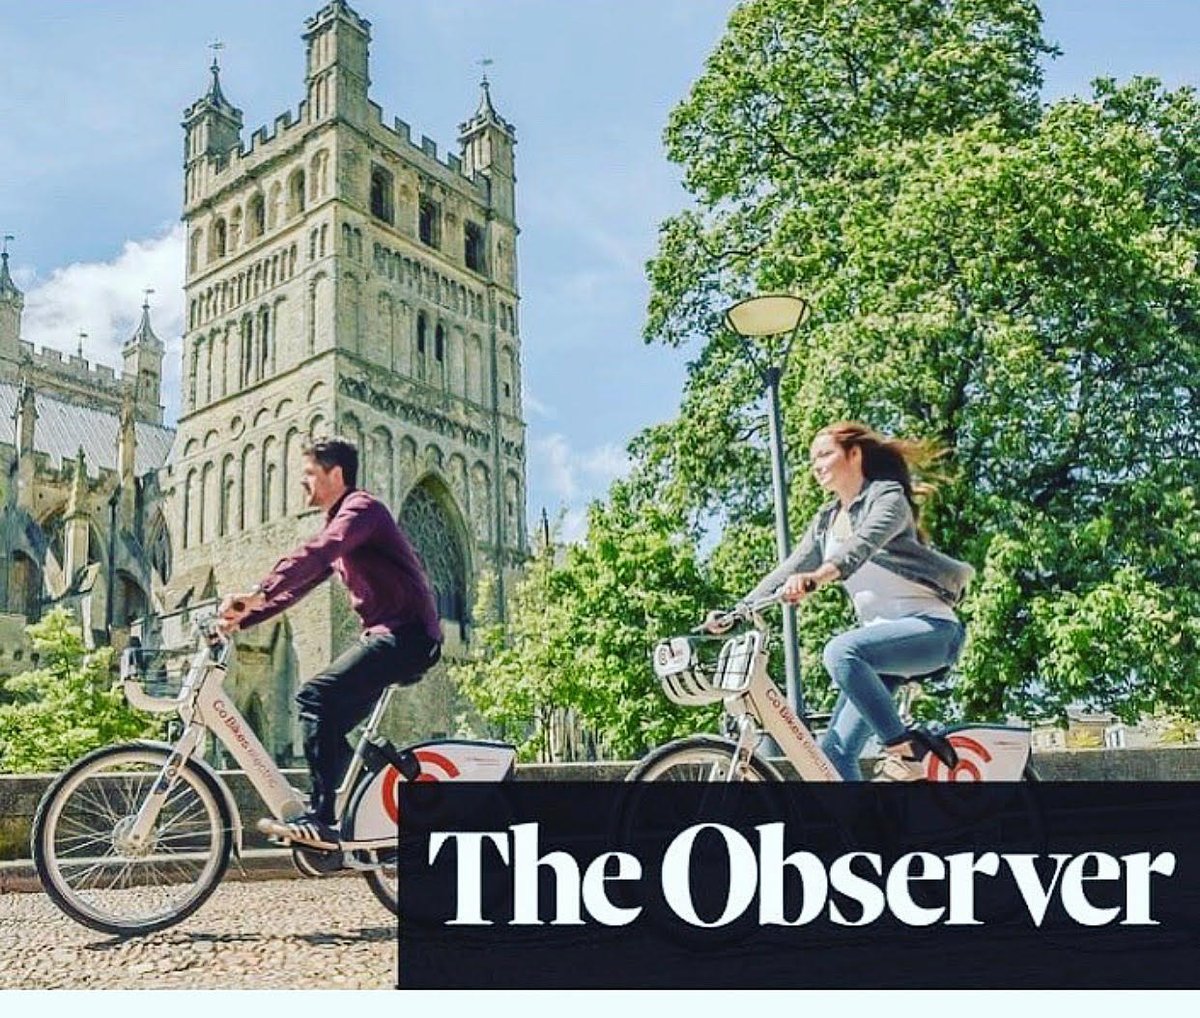 If I wasn't missing doing commercial and marketing photography enough, I see this over the weekend in the @observer :) This is an image taken during a promotional shoot for @CoCars in #Exeter  #commercialphotography #exeterphotographer #electricbike  #marketingphotography